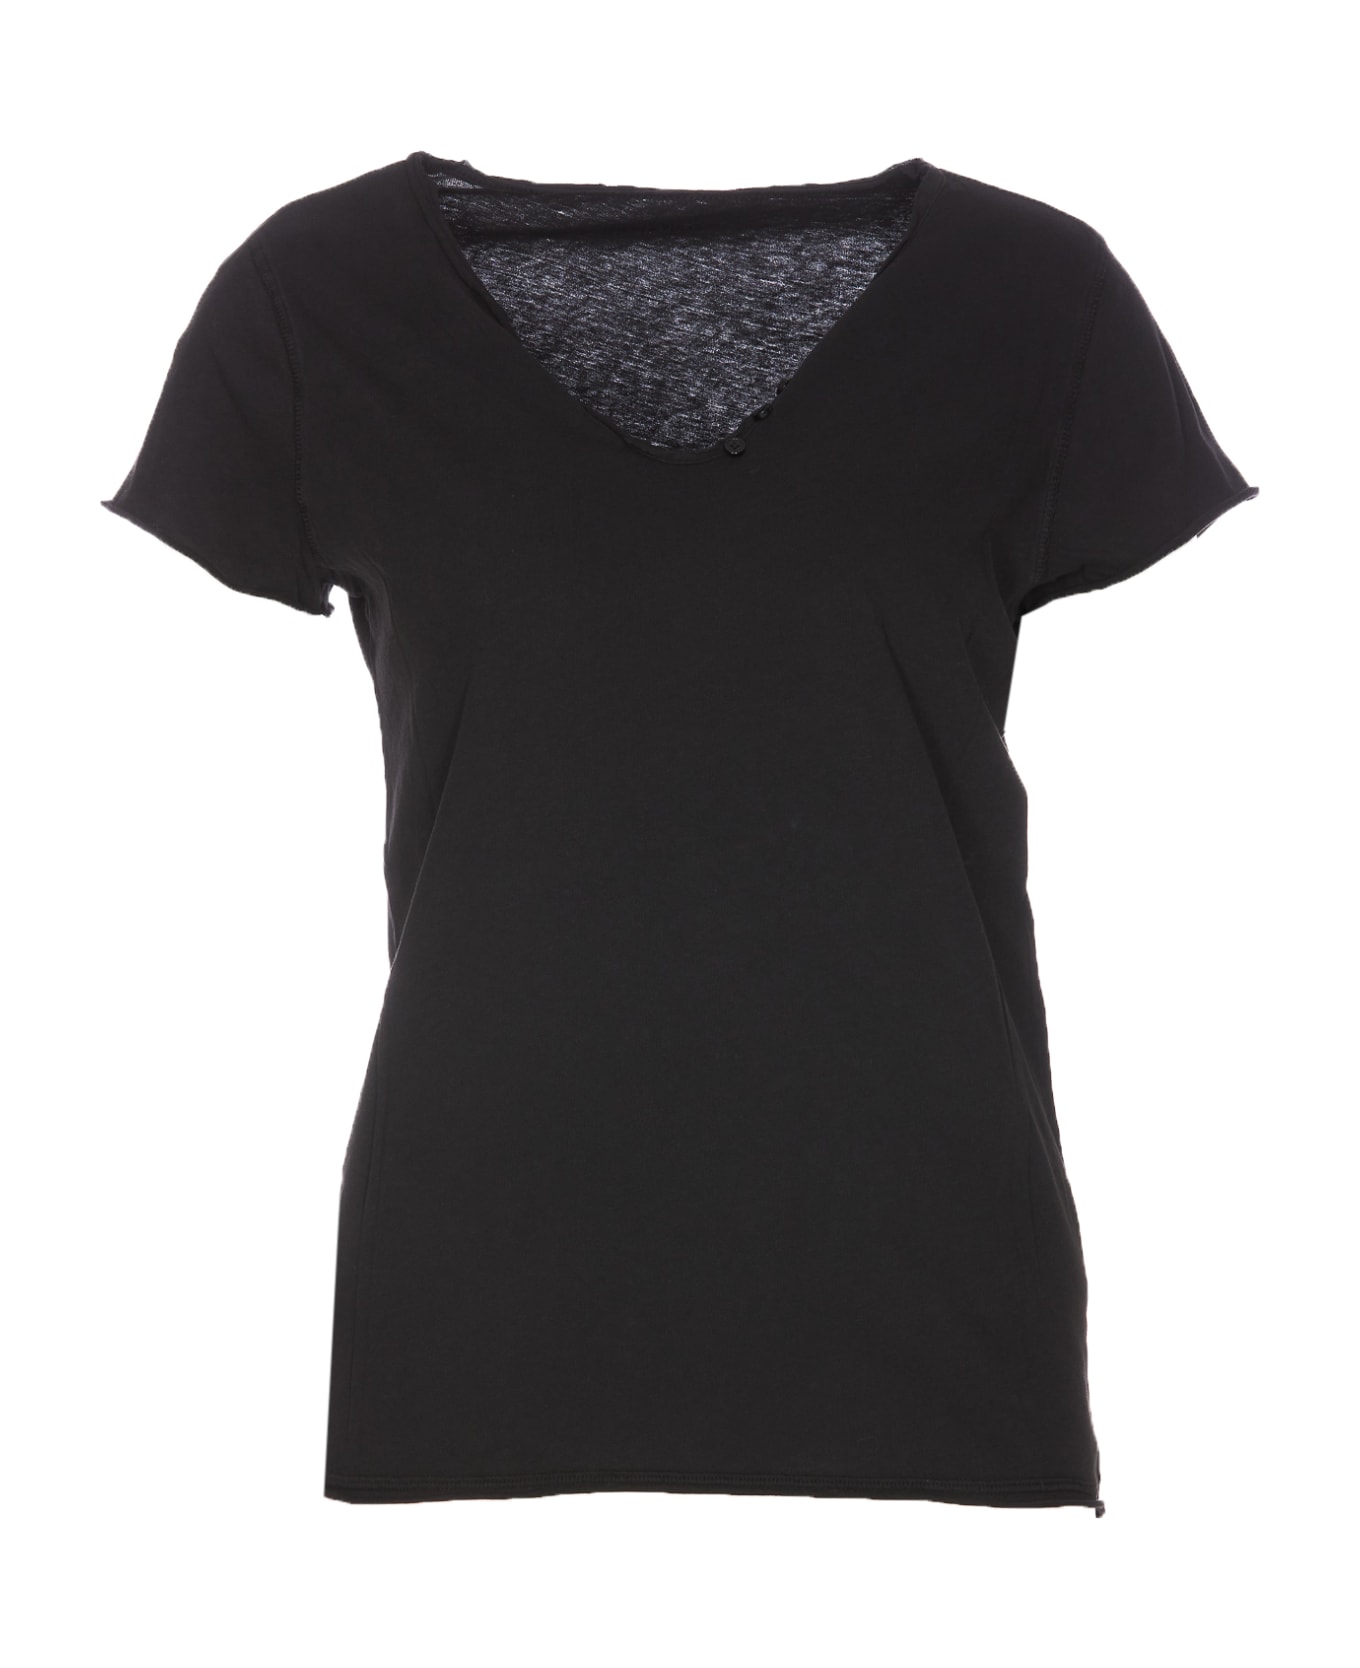 Zadig & Voltaire Tunisien Peace Love Wings T-shirt - Black